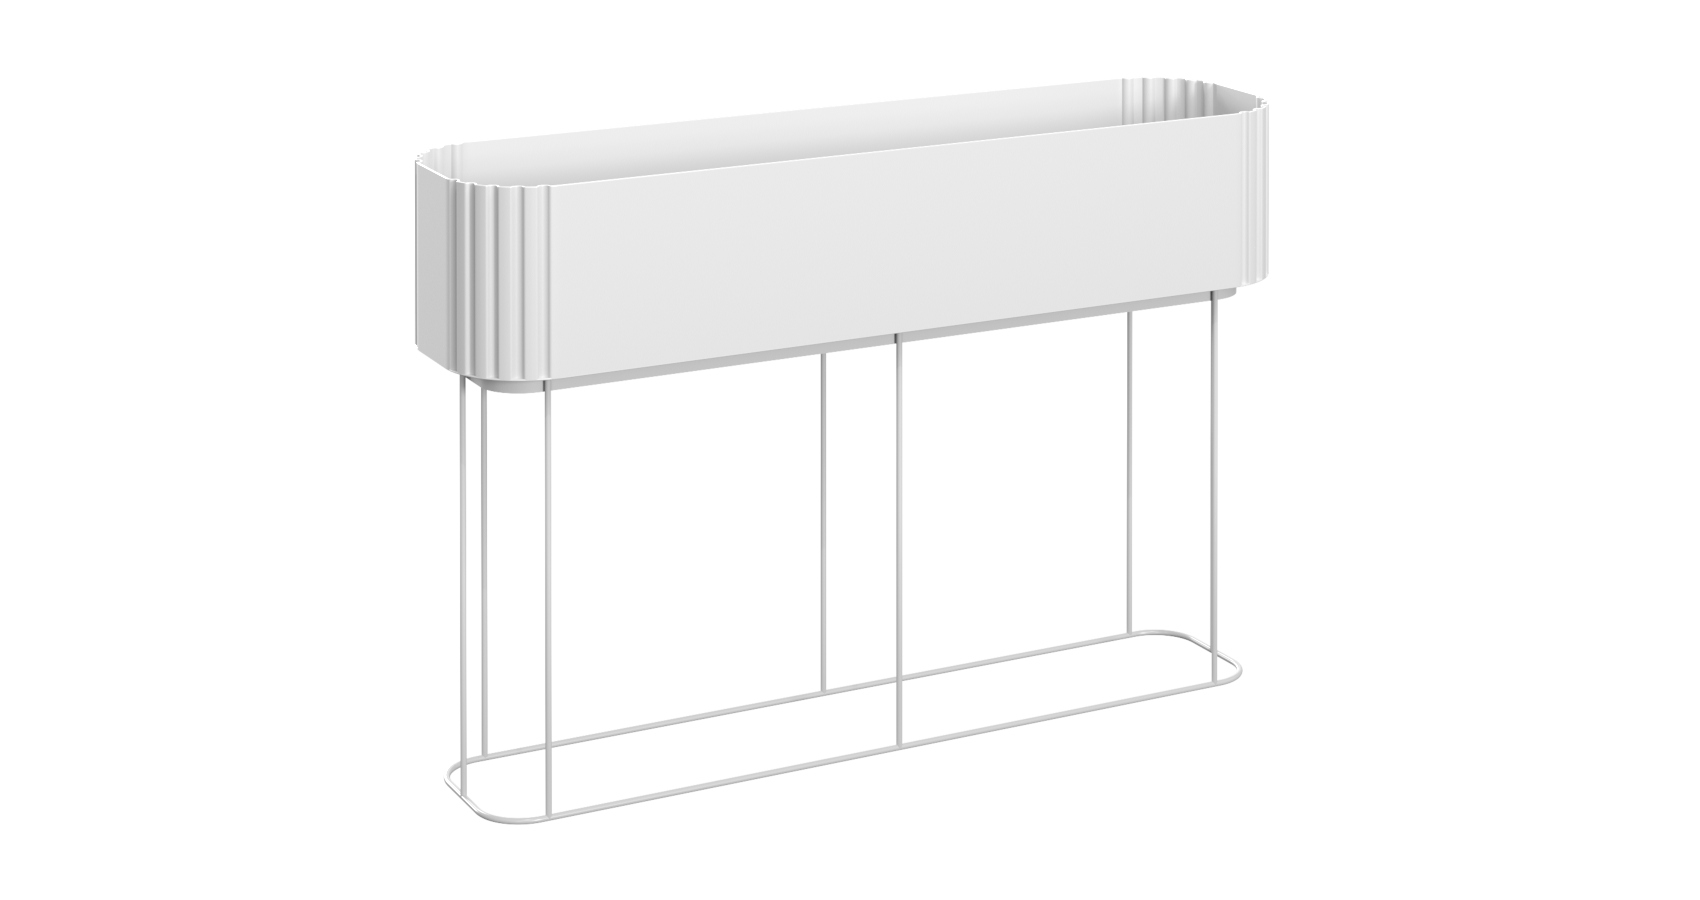 Cubby Planter in white 900mm wide in front view